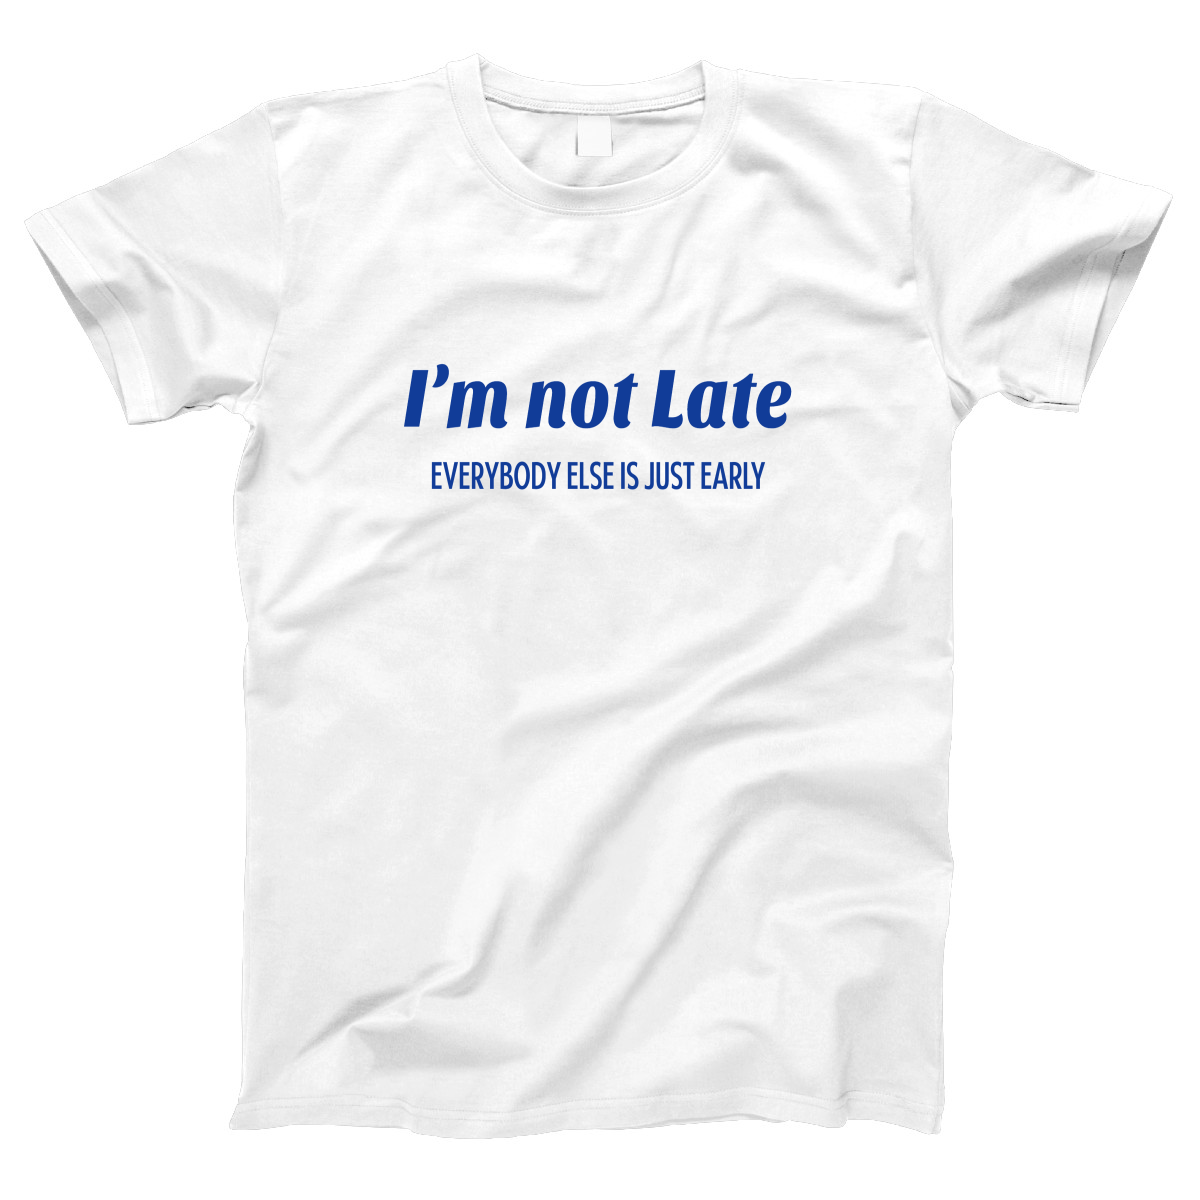 I’m not late everybody else is just early Women's T-shirt | White